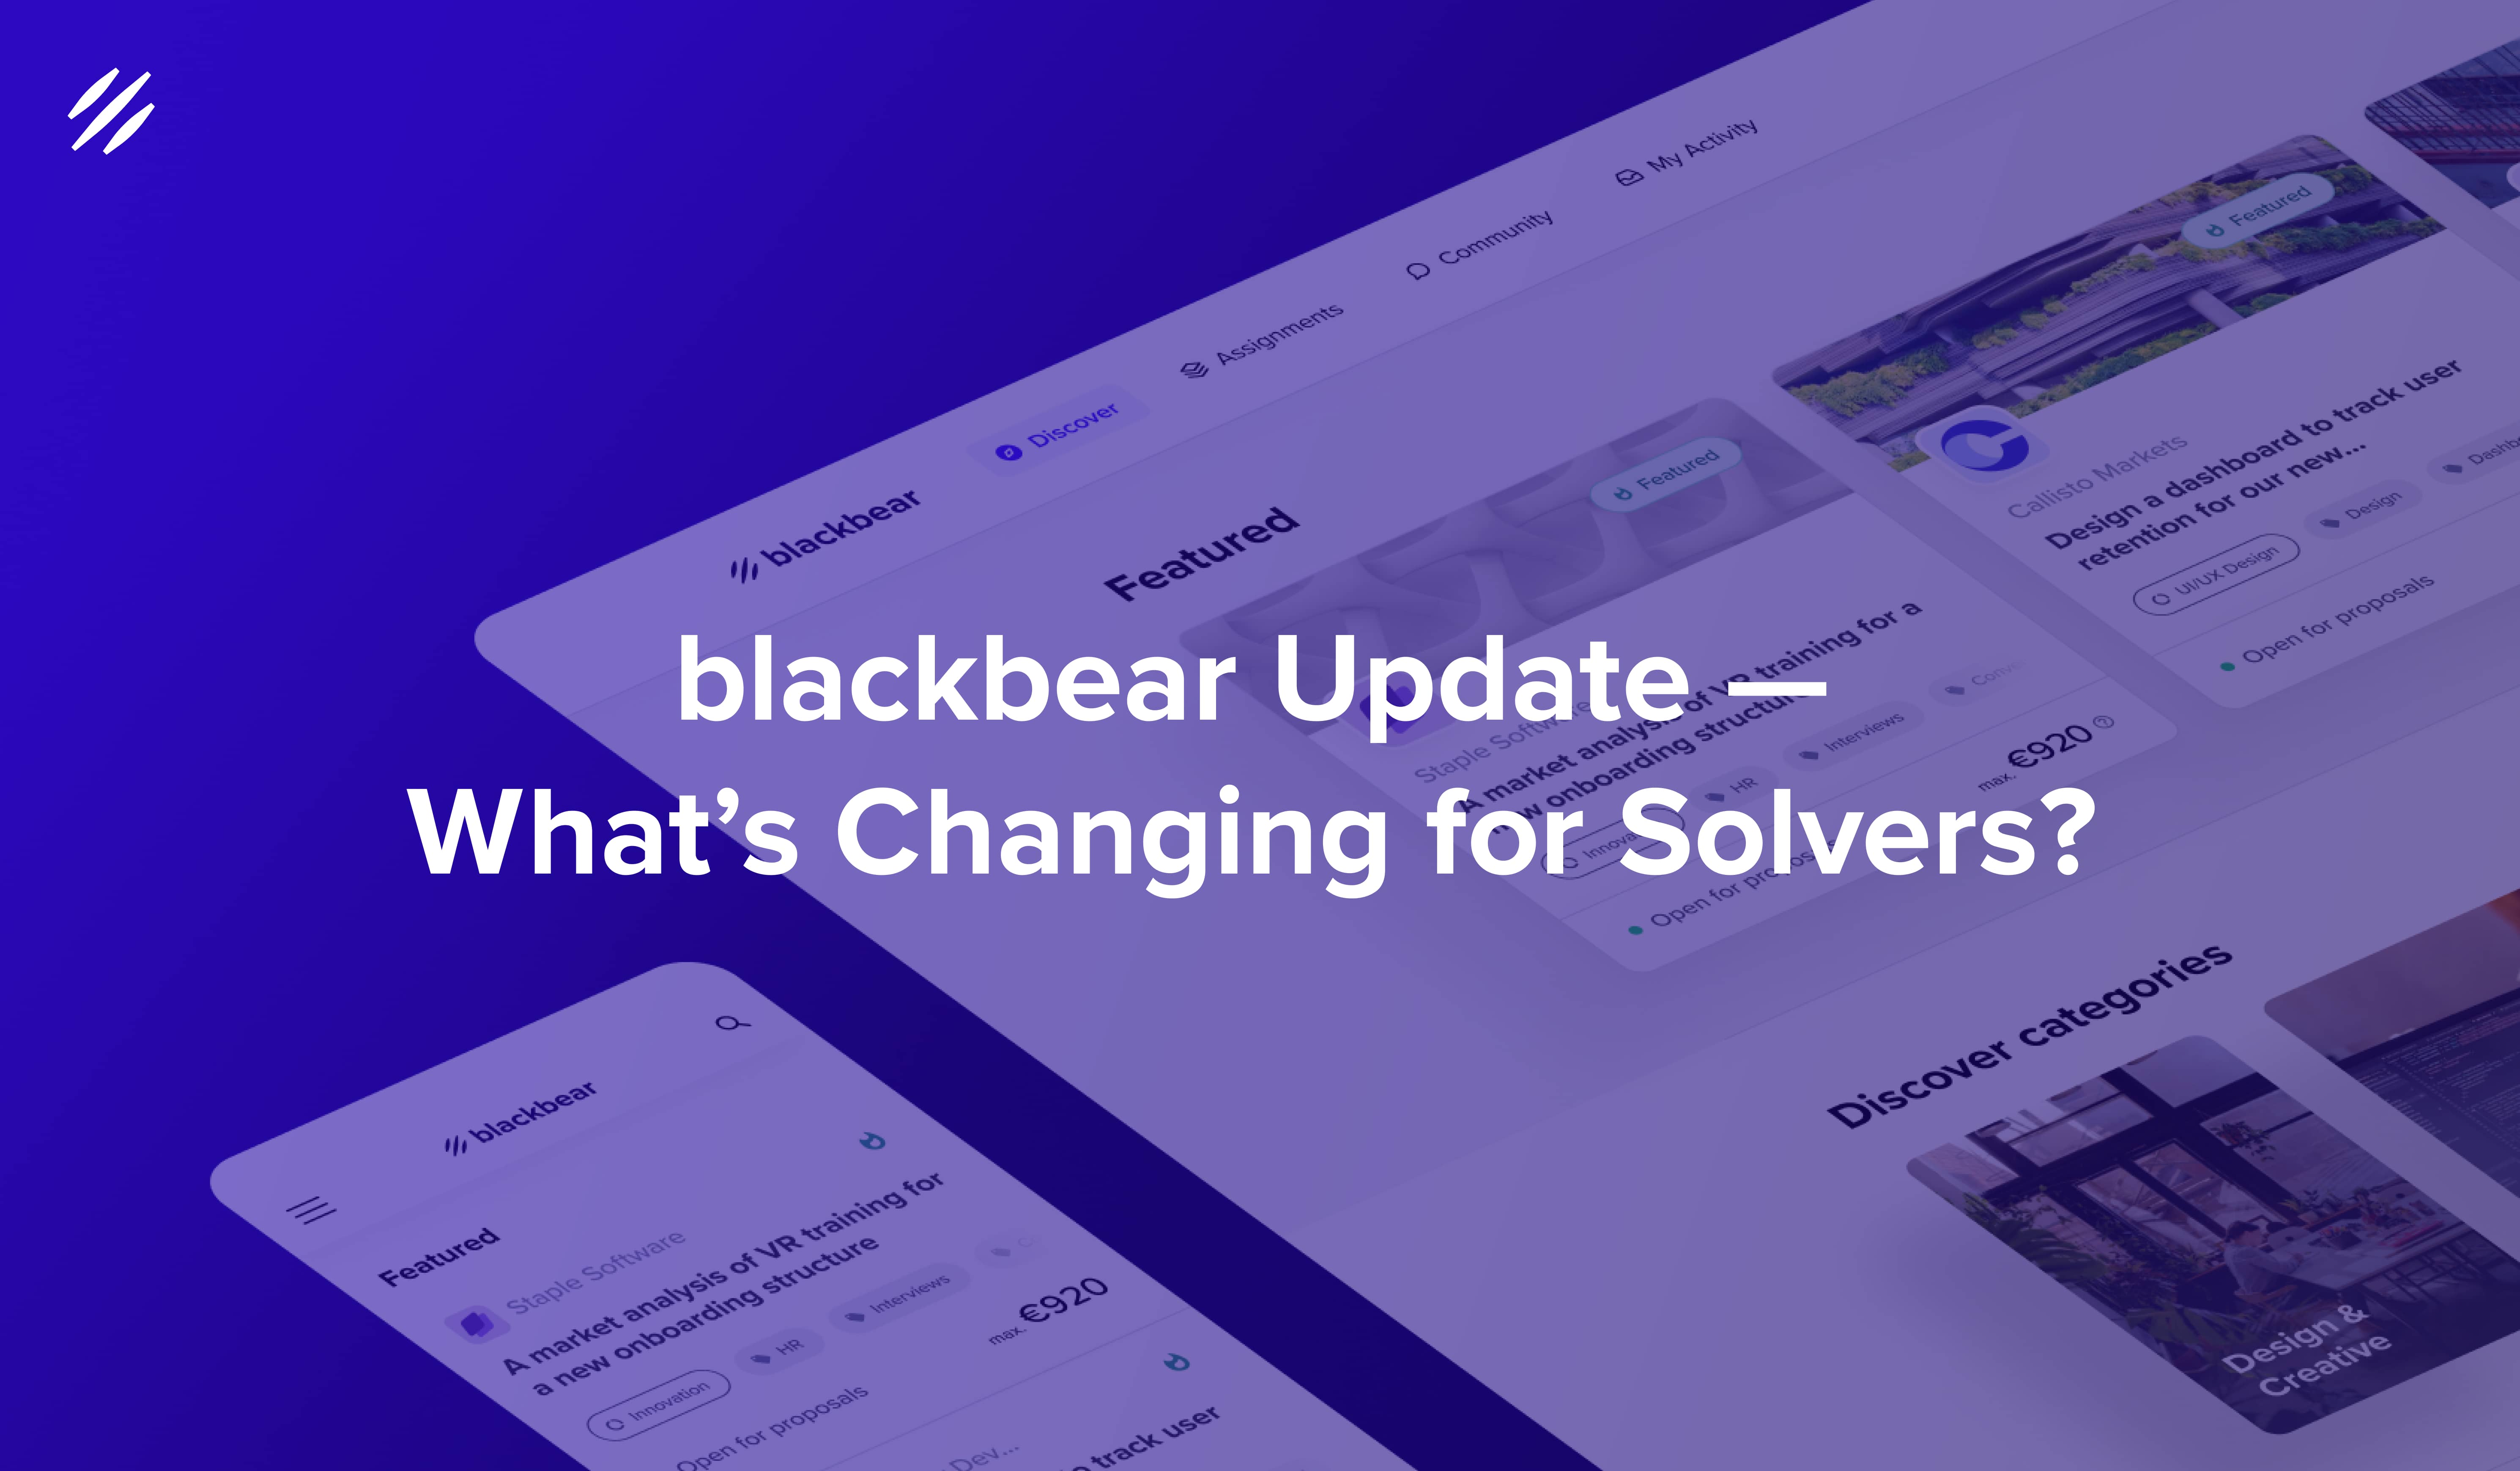 blackbear Platform Update — What's Changing for Solvers?